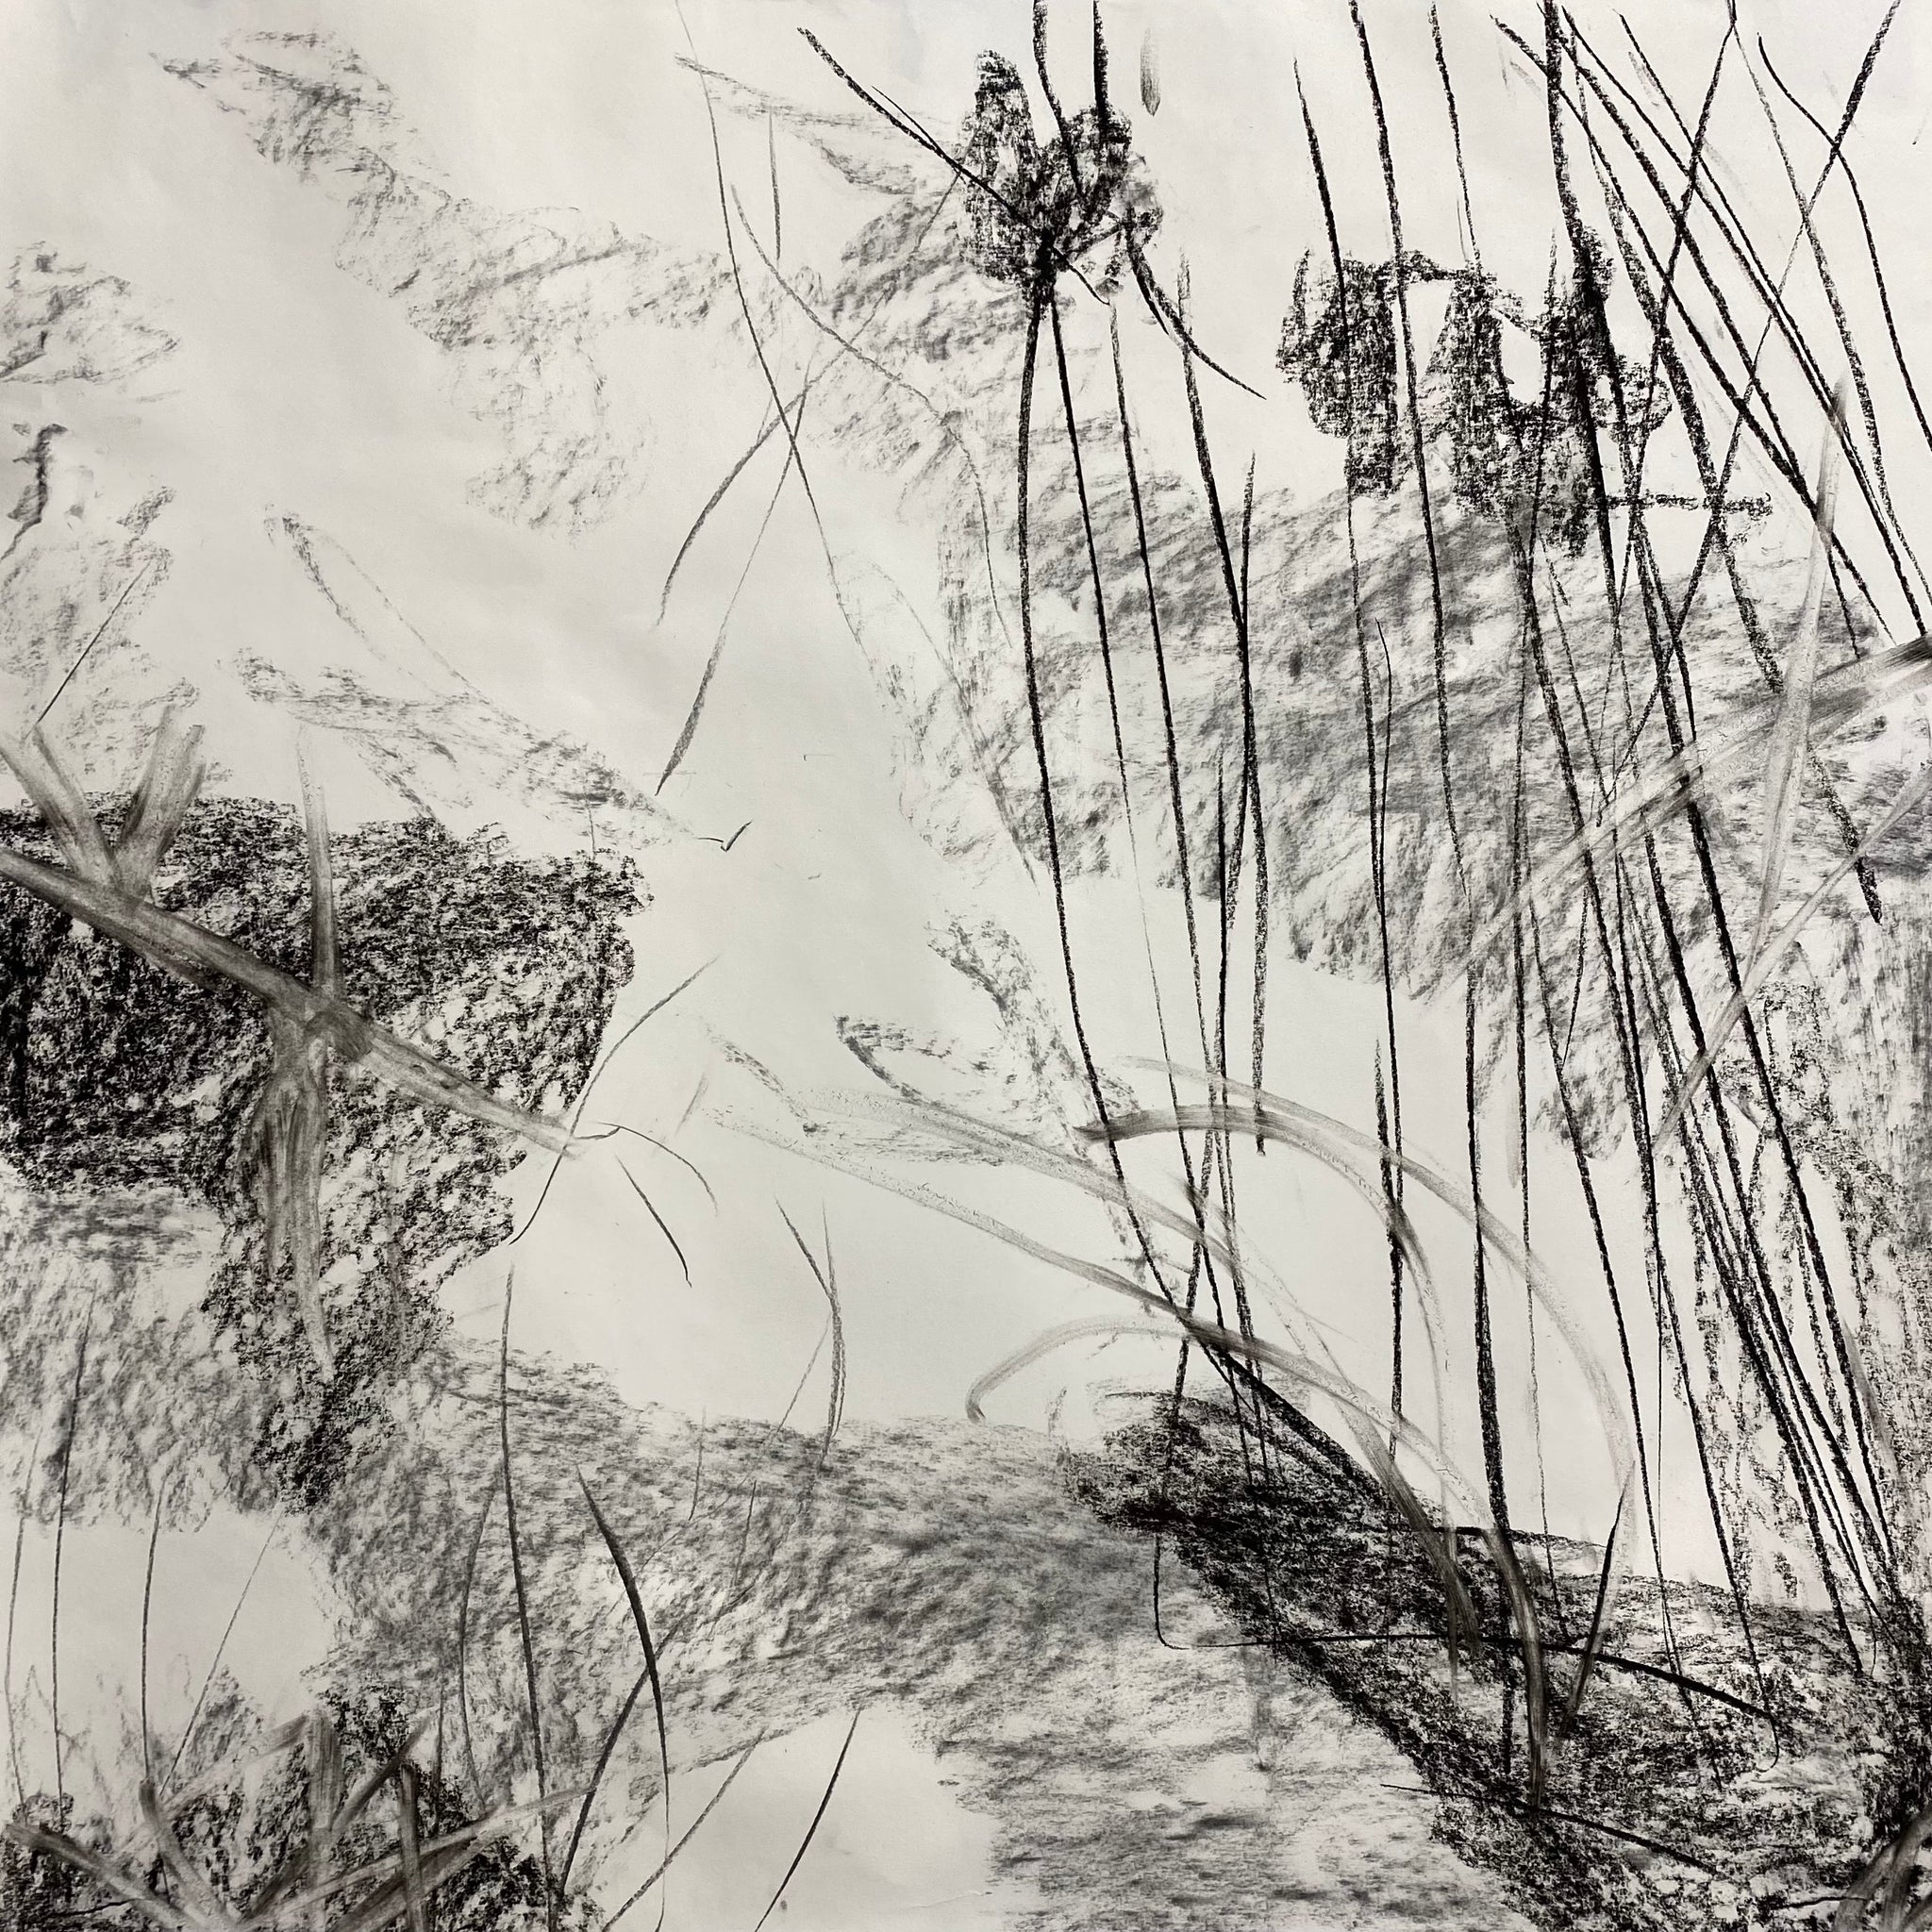 Juanita Bellavance, Spring joy concept drawing, From the Chestatee River portfolio, 2021, Charcoal on paper, 24 x 24 inches